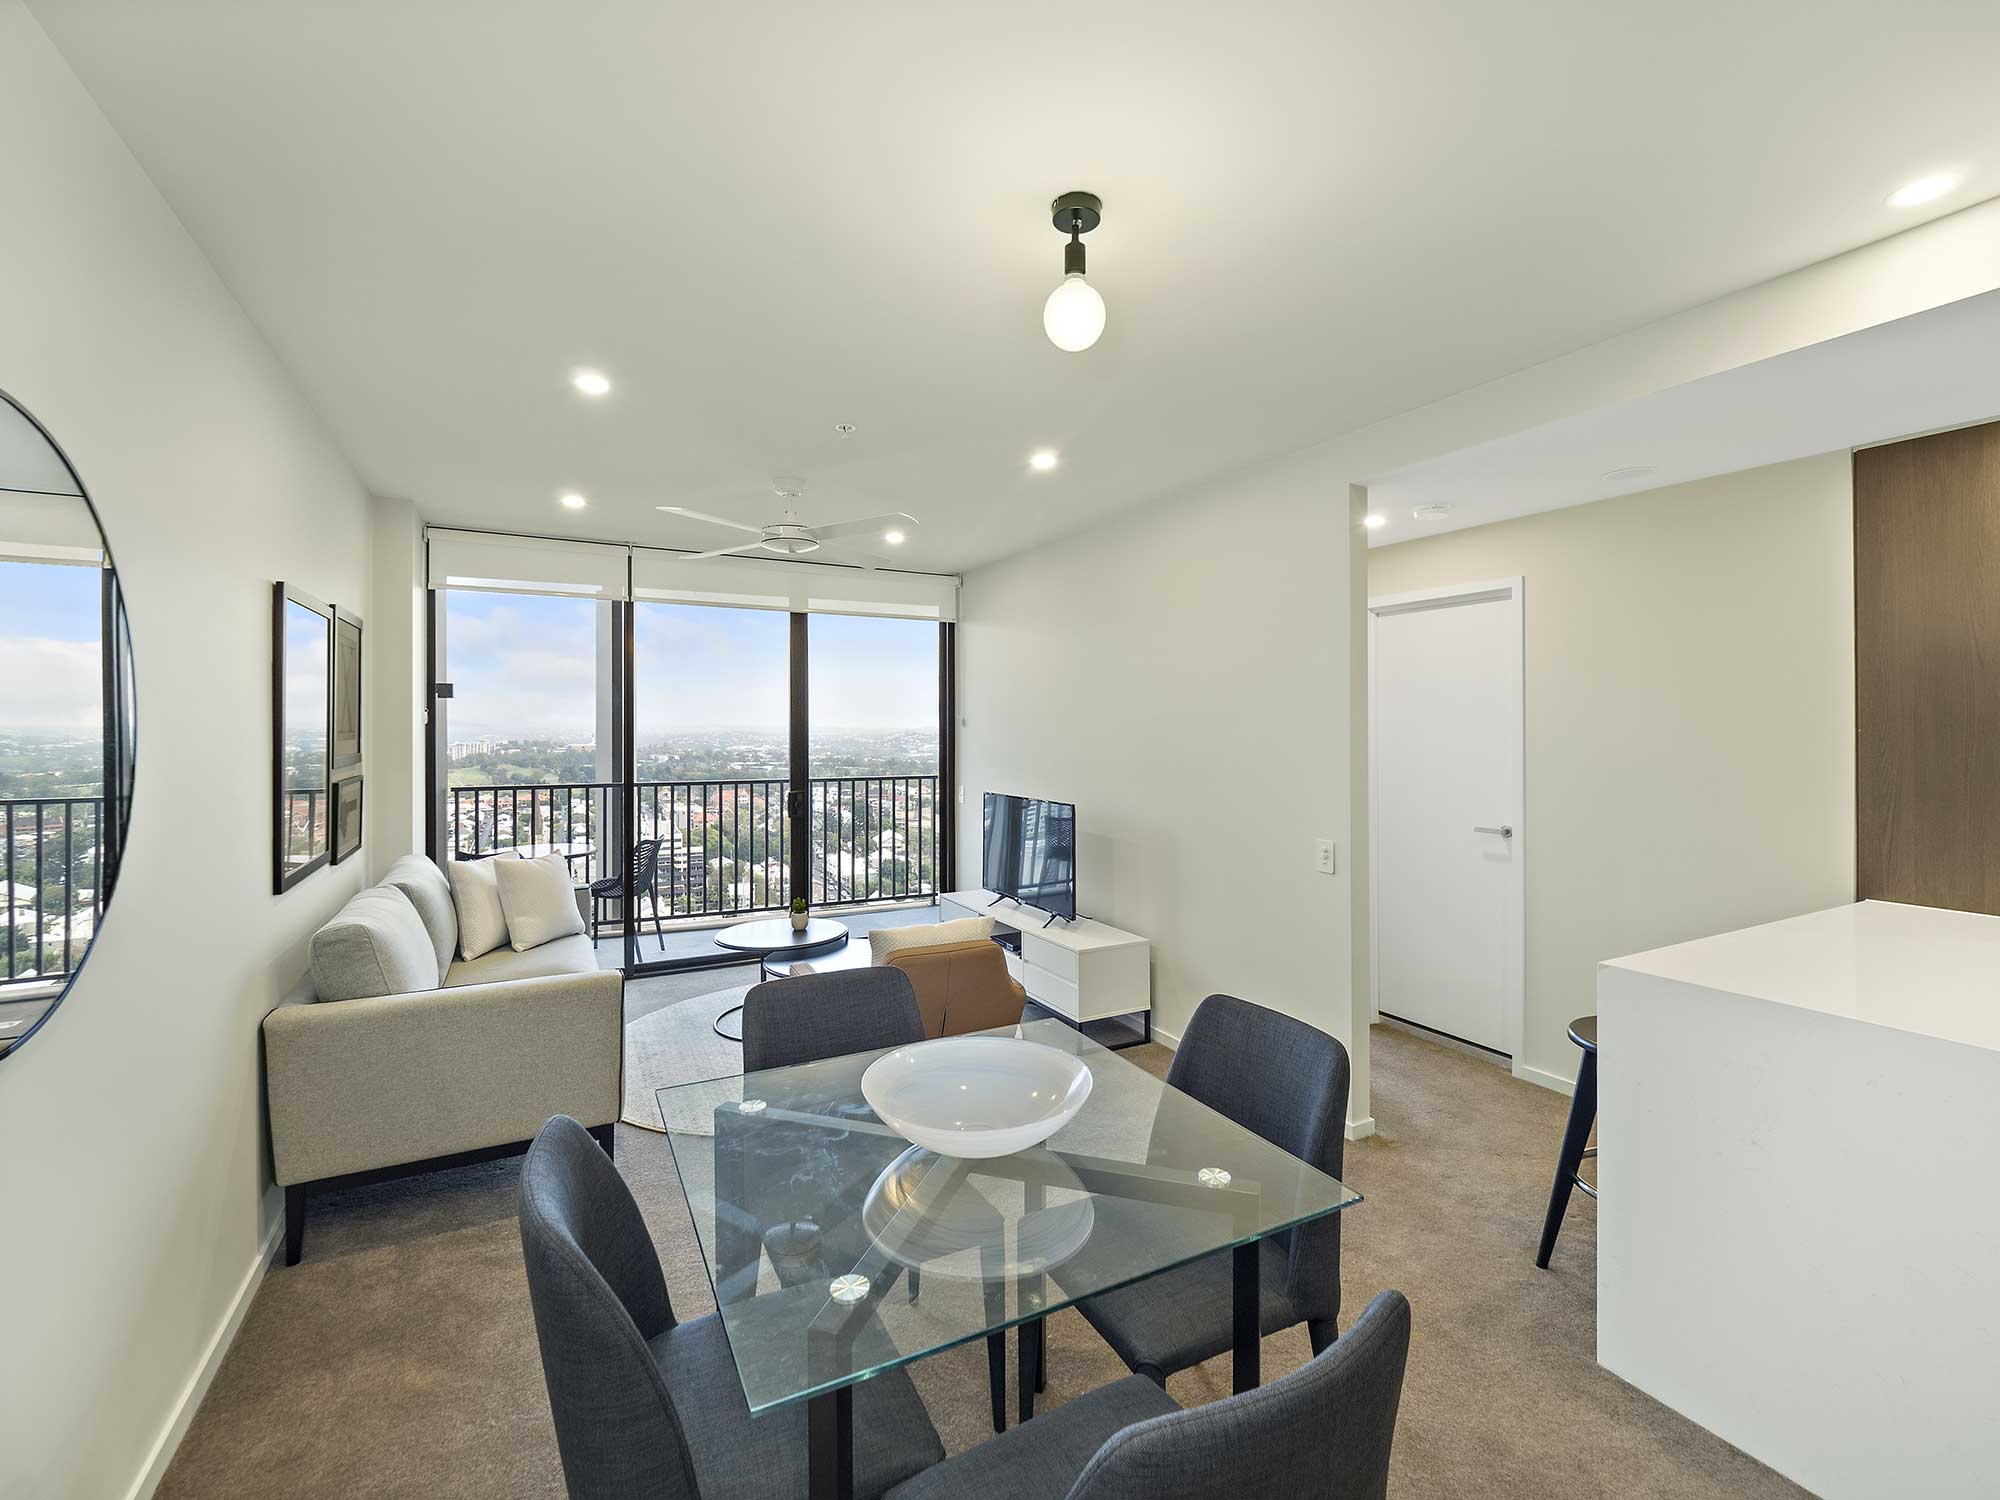 Real estate apartment photography Spire Residences, Apartment 3210 lounge, September 2018